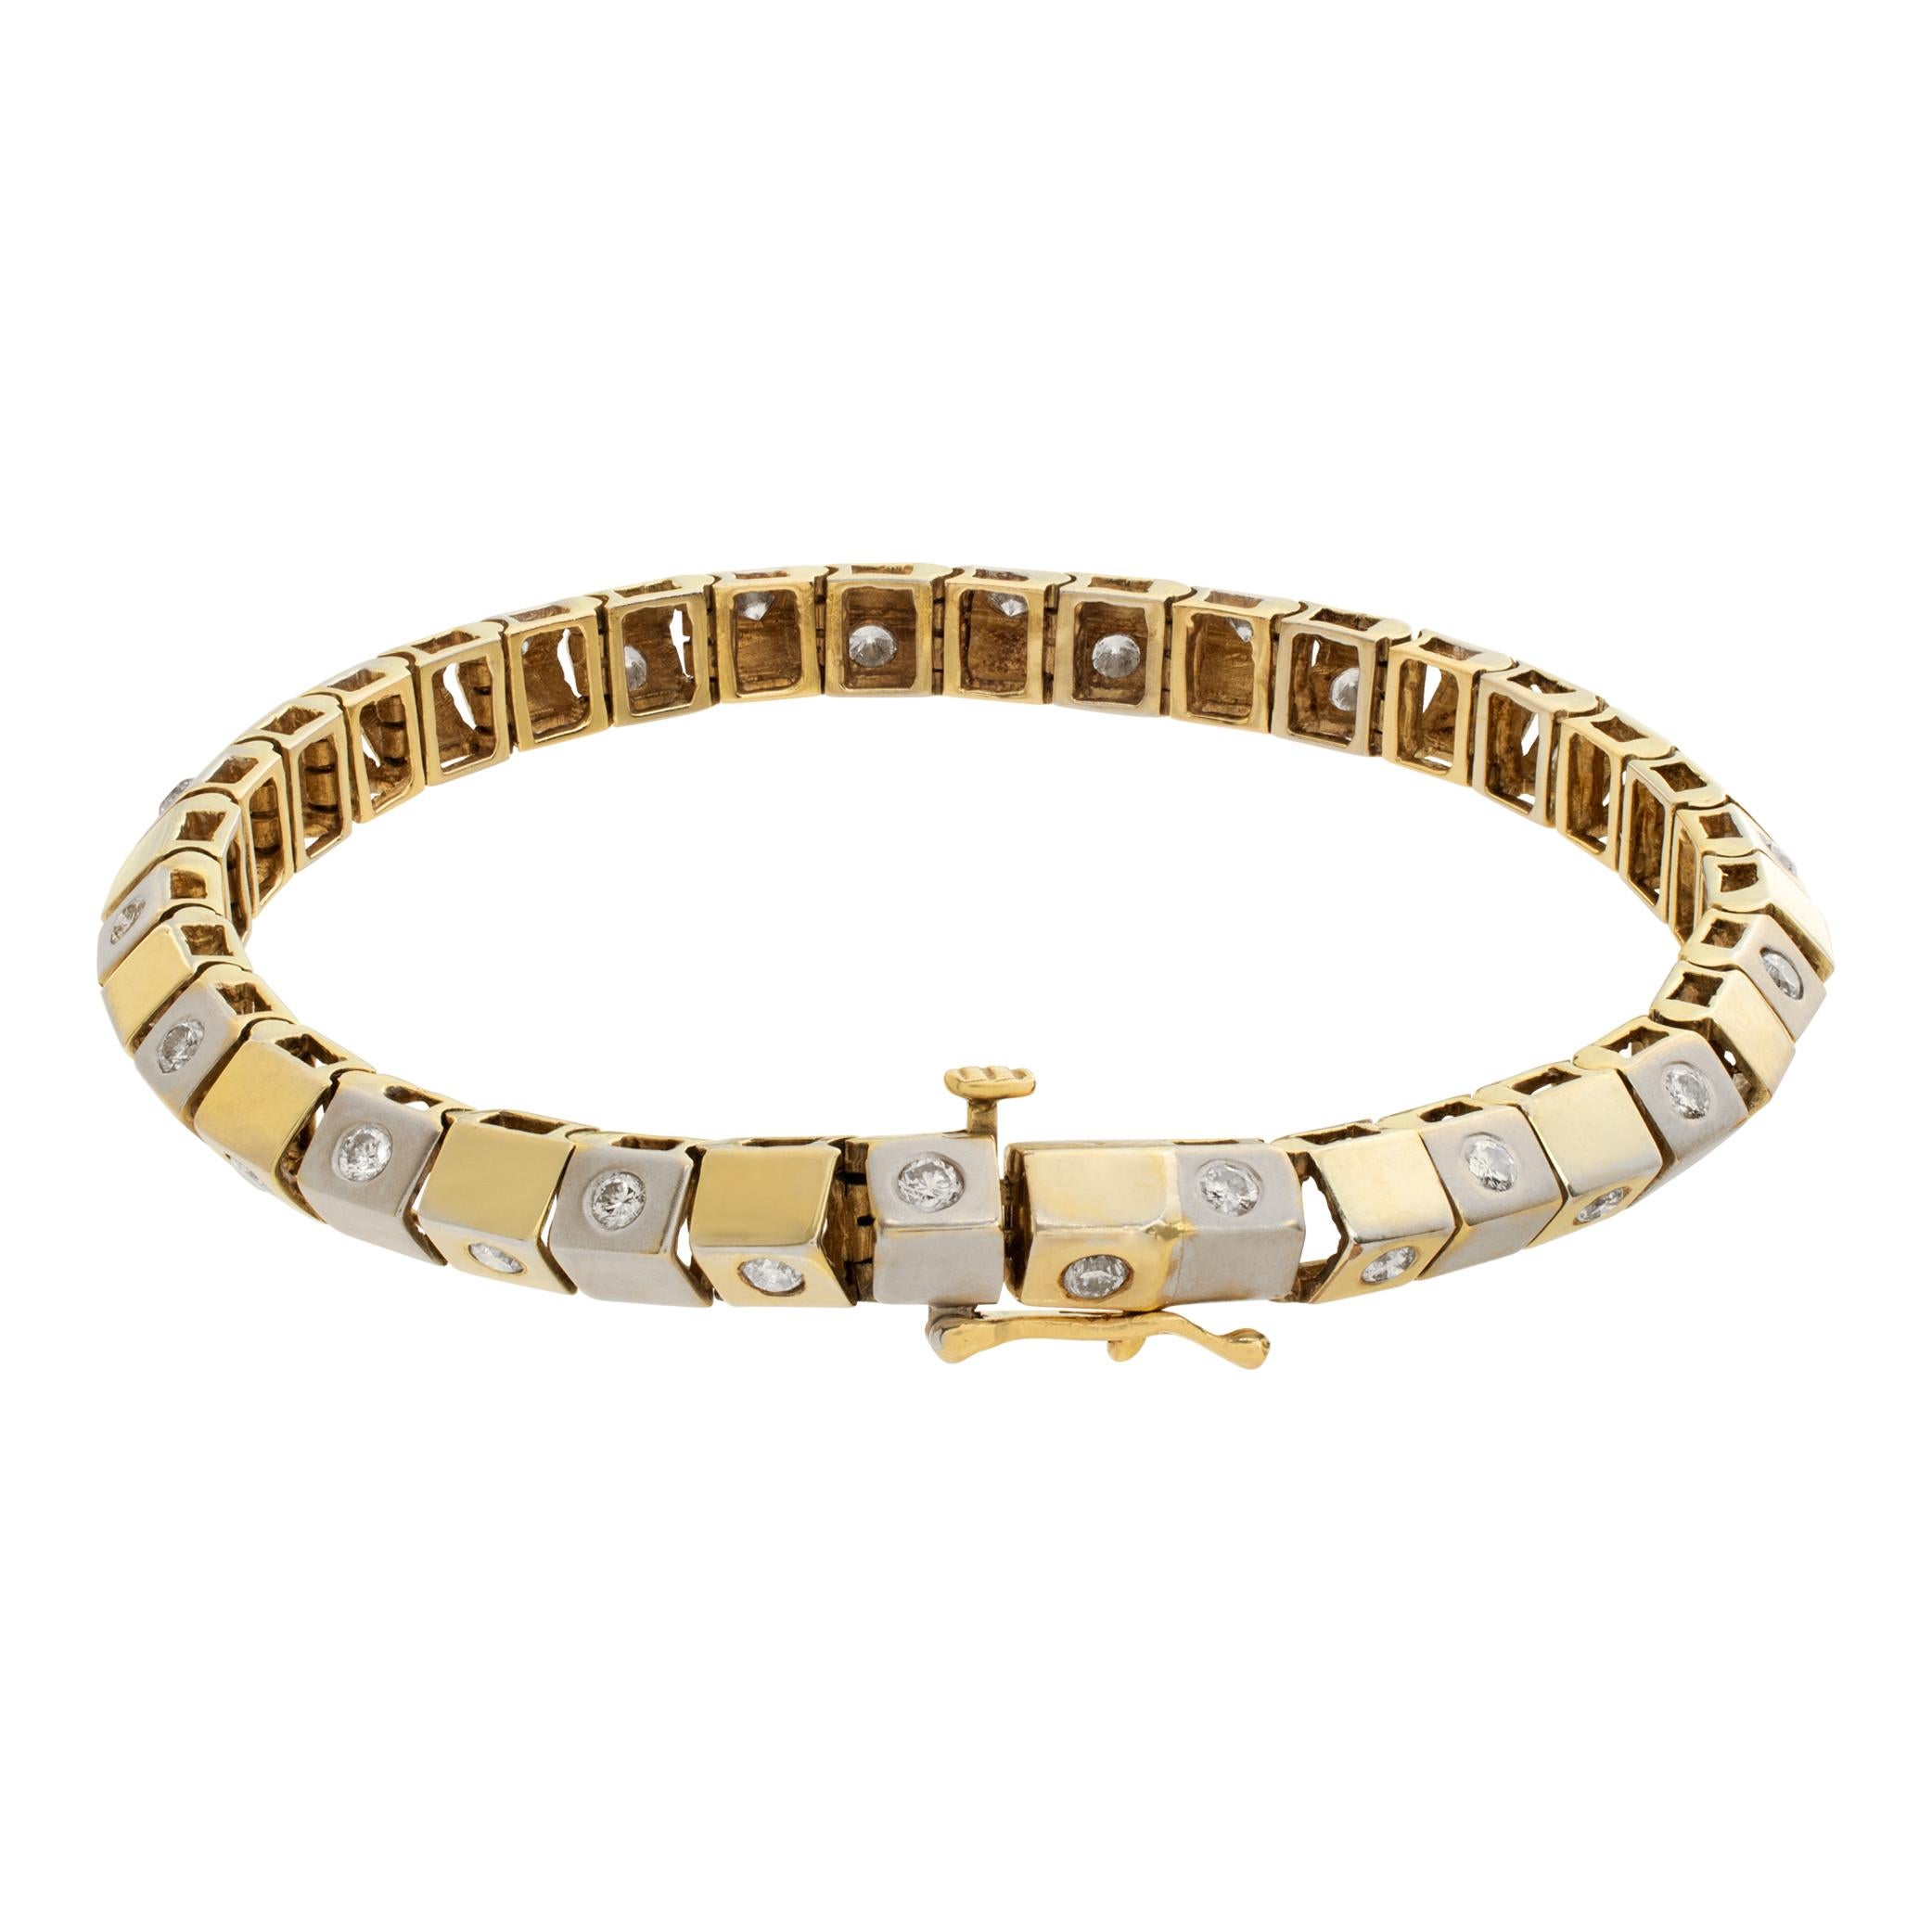 Box 18k white & yellow gold link bracelet In Excellent Condition For Sale In Surfside, FL